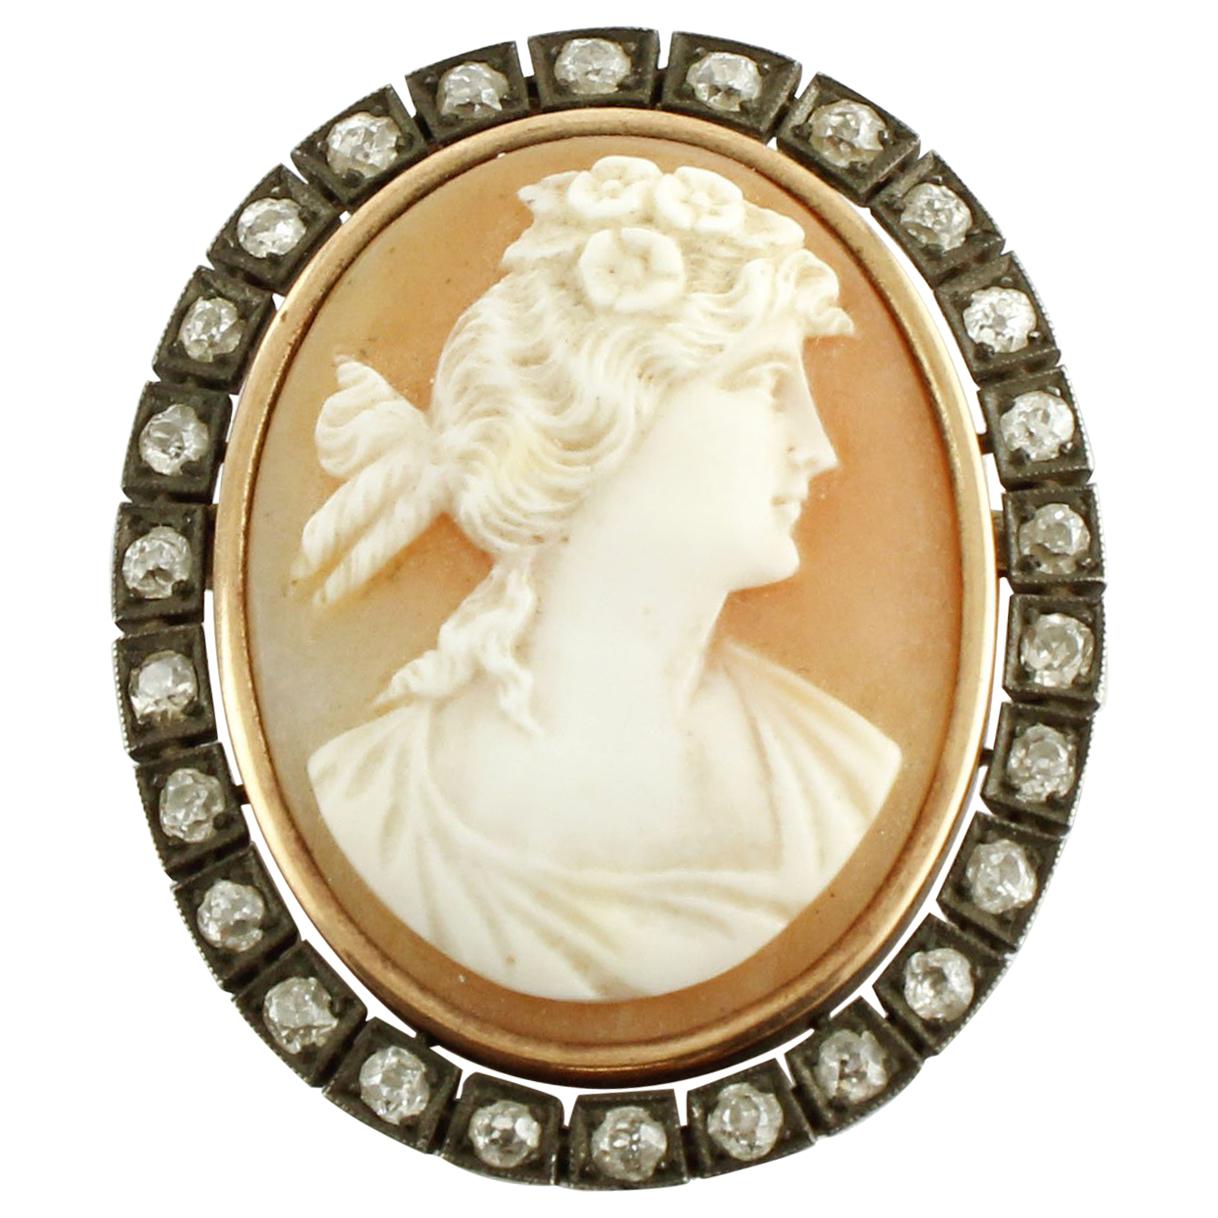 1.05 Carat Diamonds, 3.5 G Carved Cameo, Rose Gold and Silver Retrò Brooch